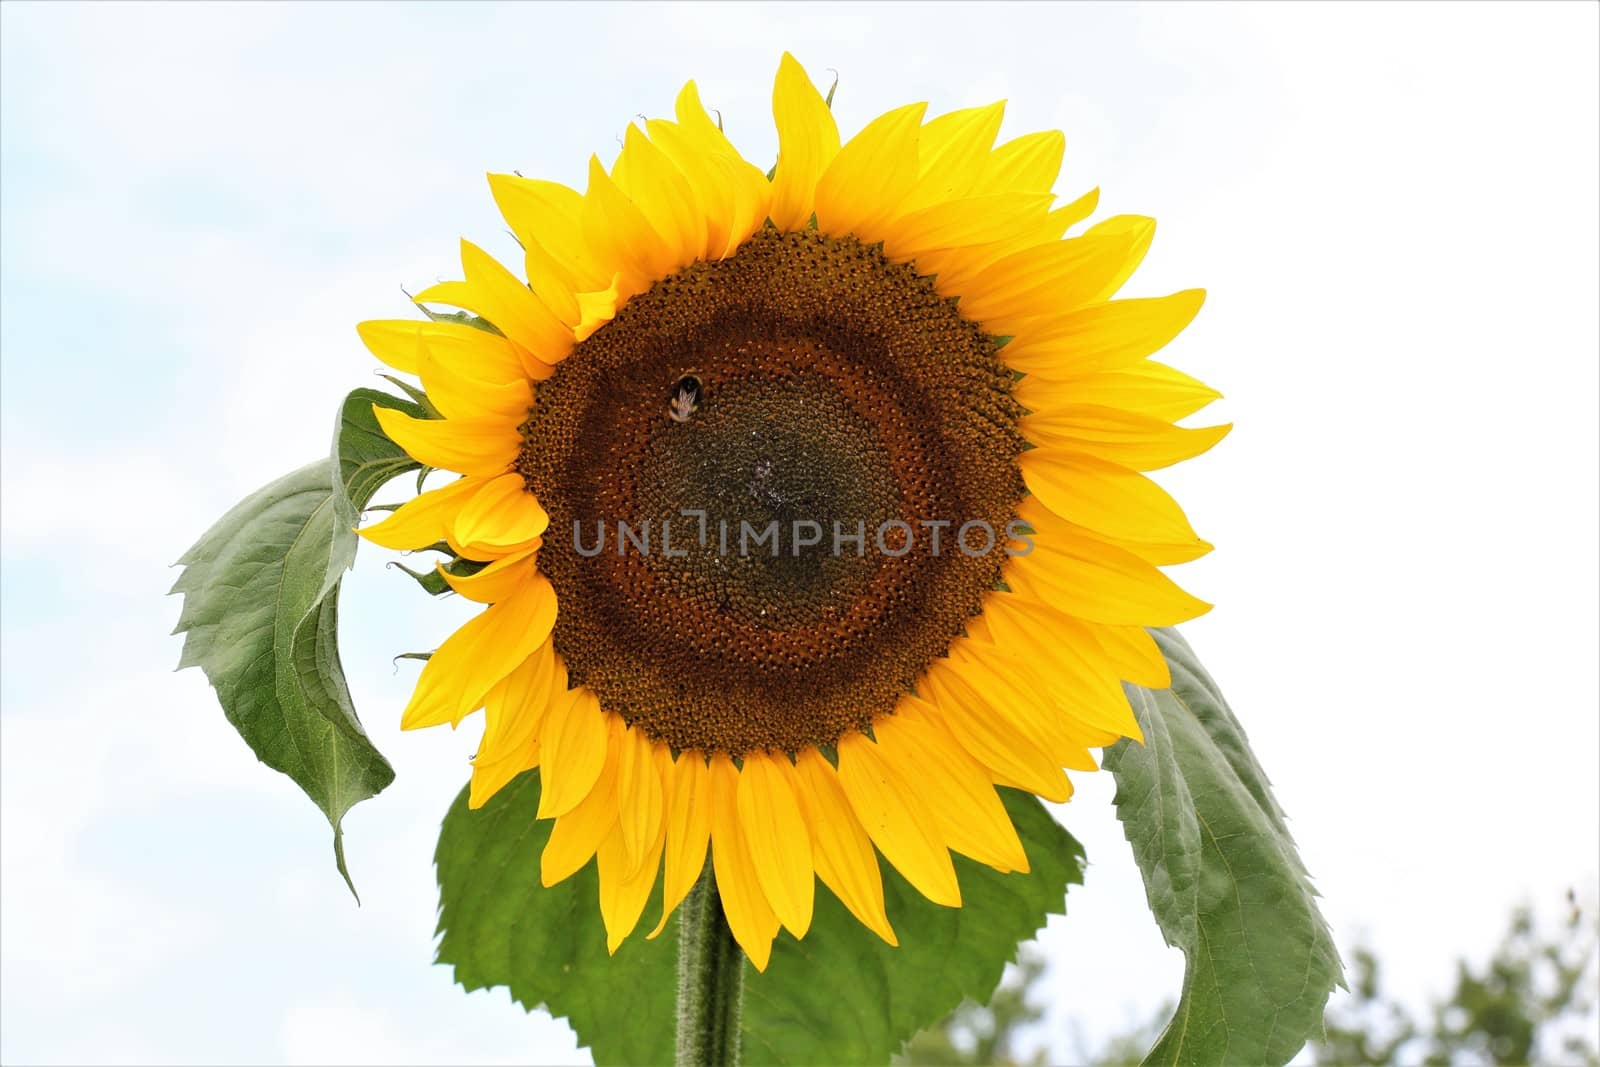 Sunflower with green leaves against a light background